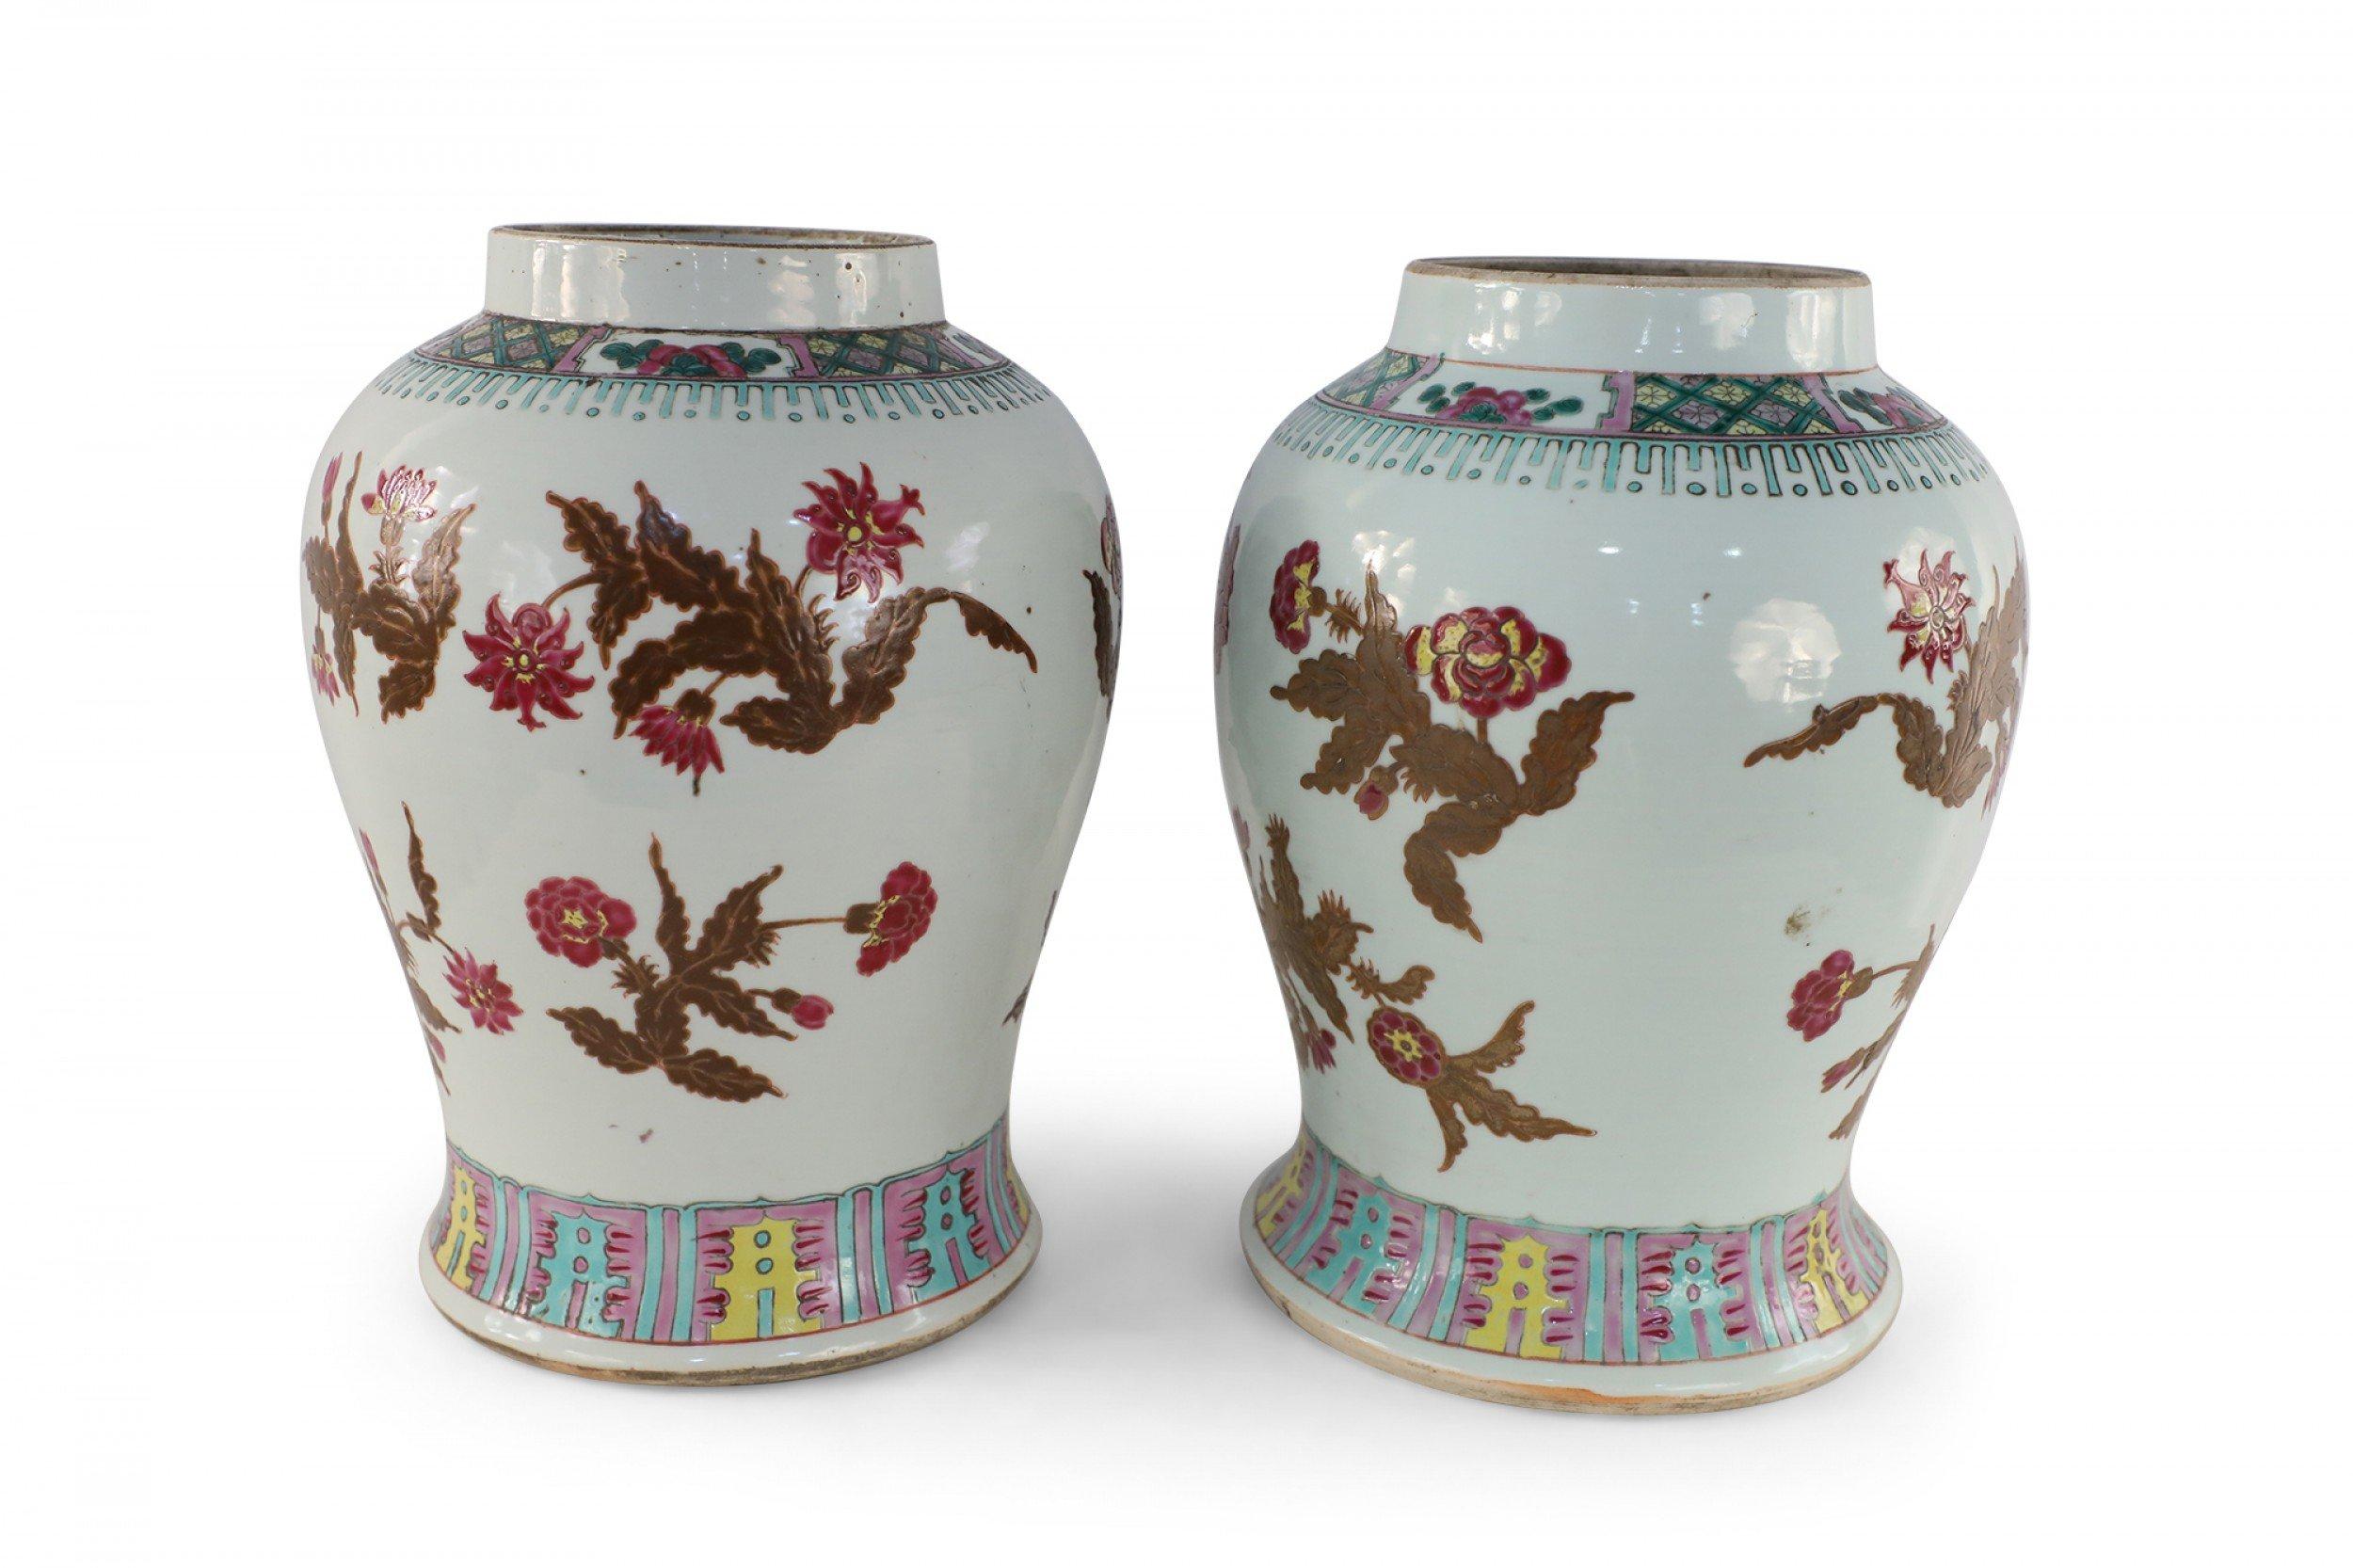 Pair of Chinese white porcelain vases decorated with umber and pink floral motifs wrapping the bulbous forms, accented in blue, pink and yellow patterned bands around the tops and bases (Priced as pair).
 